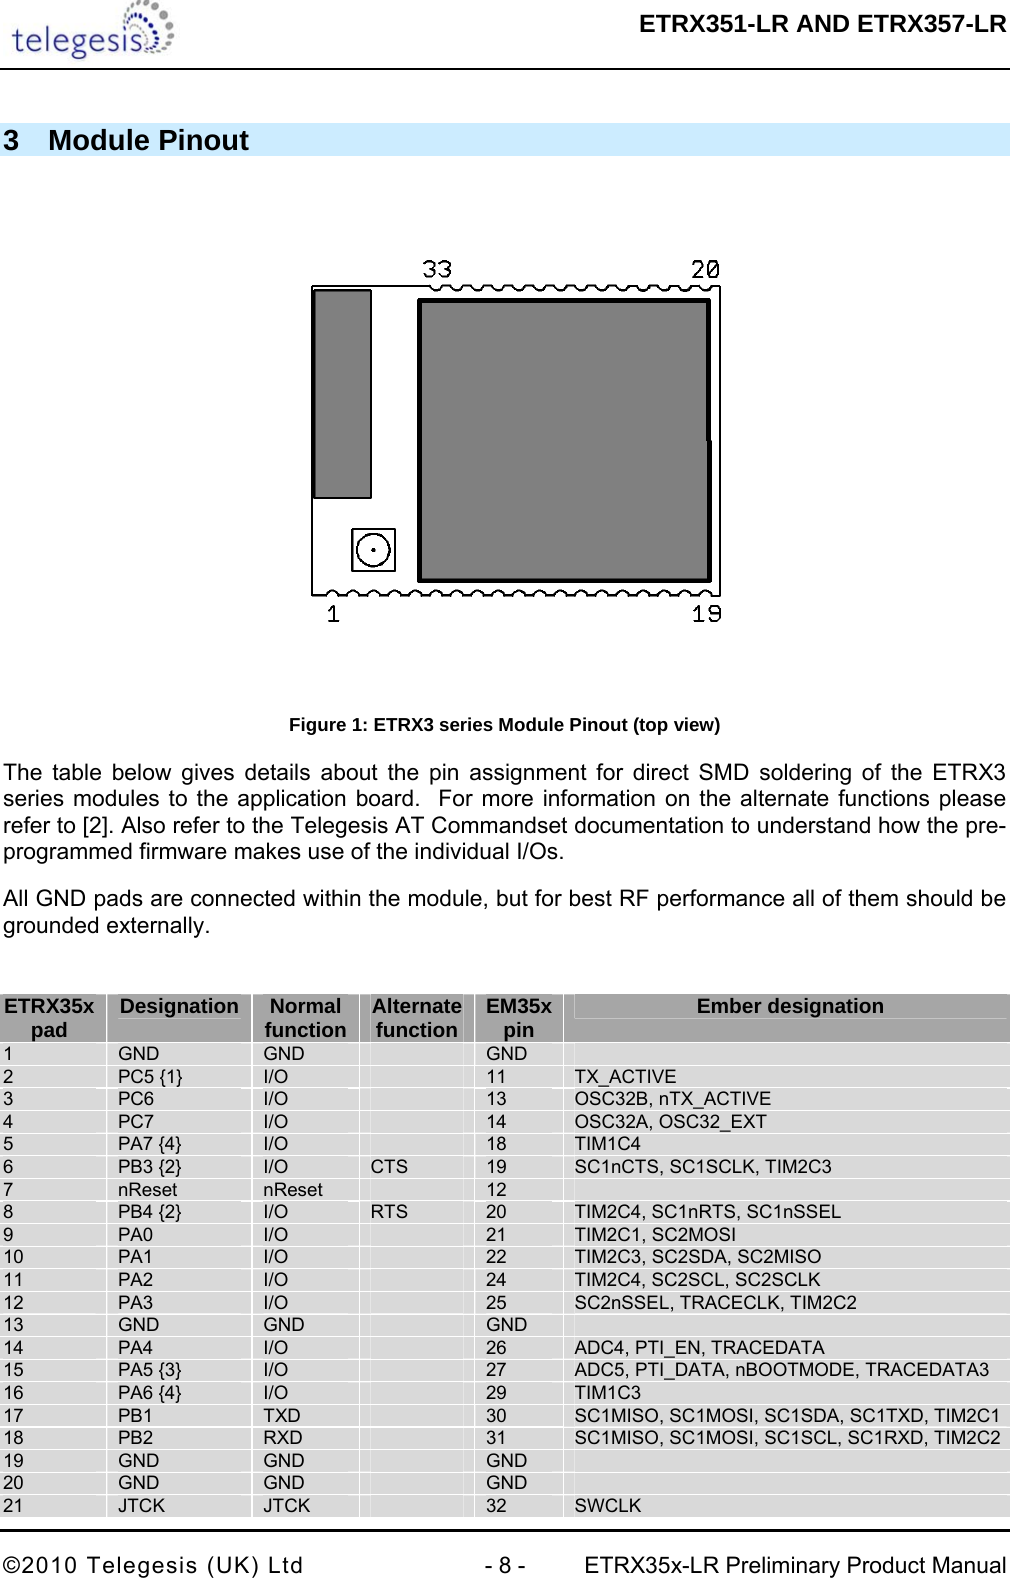  ETRX351-LR AND ETRX357-LR  ©2010 Telegesis (UK) Ltd  - 8 -  ETRX35x-LR Preliminary Product Manual 3 Module Pinout  Figure 1: ETRX3 series Module Pinout (top view) The table below gives details about the pin assignment for direct SMD soldering of the ETRX3 series modules to the application board.  For more information on the alternate functions please refer to [2]. Also refer to the Telegesis AT Commandset documentation to understand how the pre-programmed firmware makes use of the individual I/Os. All GND pads are connected within the module, but for best RF performance all of them should be grounded externally.  ETRX35x pad  Designation  Normal function  Alternate function  EM35x pin  Ember designation 1  GND  GND   GND   2  PC5 {1}  I/O   11  TX_ACTIVE  3  PC6  I/O   13  OSC32B, nTX_ACTIVE 4  PC7  I/O   14  OSC32A, OSC32_EXT 5  PA7 {4}  I/O   18  TIM1C4 6  PB3 {2}  I/O  CTS  19  SC1nCTS, SC1SCLK, TIM2C3 7  nReset  nReset   12   8  PB4 {2}  I/O  RTS  20  TIM2C4, SC1nRTS, SC1nSSEL 9  PA0  I/O   21  TIM2C1, SC2MOSI 10  PA1  I/O   22  TIM2C3, SC2SDA, SC2MISO 11  PA2  I/O   24  TIM2C4, SC2SCL, SC2SCLK 12  PA3  I/O   25  SC2nSSEL, TRACECLK, TIM2C2 13  GND  GND   GND   14  PA4  I/O   26  ADC4, PTI_EN, TRACEDATA 15  PA5 {3}  I/O   27  ADC5, PTI_DATA, nBOOTMODE, TRACEDATA3 16  PA6 {4}  I/O   29  TIM1C3 17  PB1  TXD   30  SC1MISO, SC1MOSI, SC1SDA, SC1TXD, TIM2C1 18  PB2  RXD   31  SC1MISO, SC1MOSI, SC1SCL, SC1RXD, TIM2C2 19  GND  GND   GND   20  GND  GND   GND   21  JTCK  JTCK   32  SWCLK 